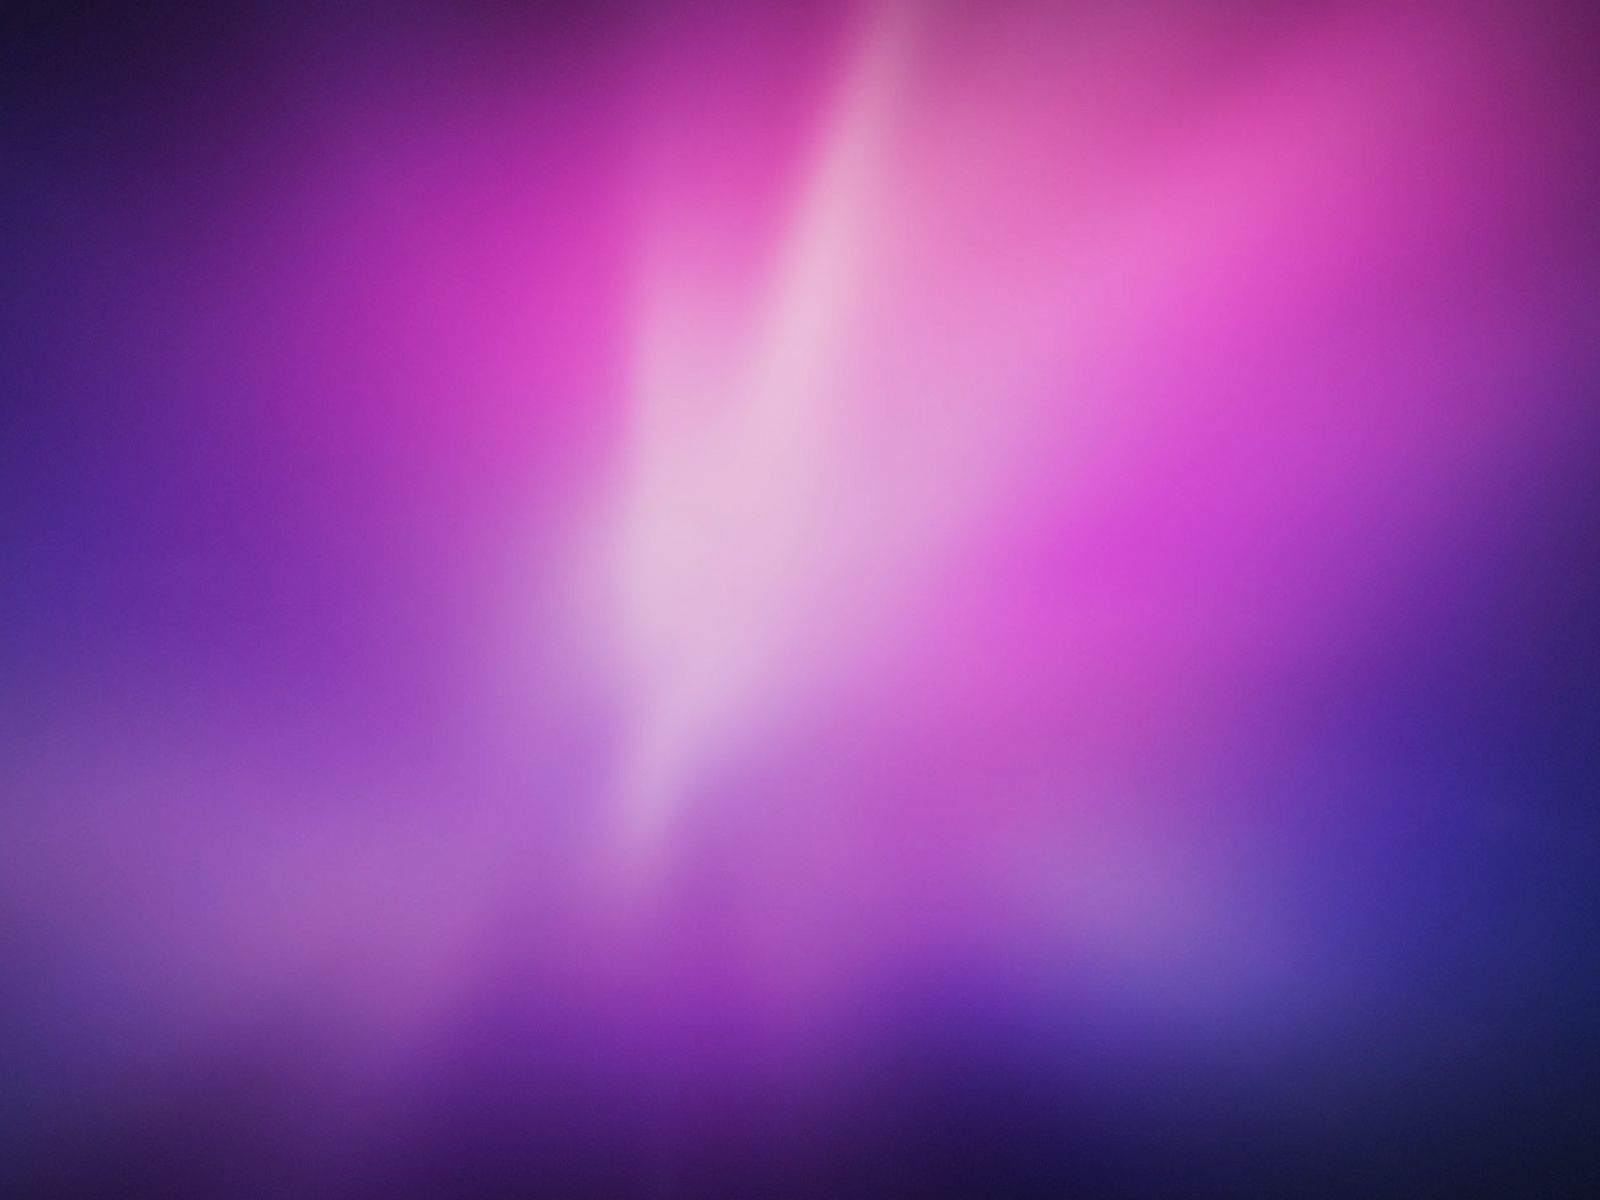 Apple Macbook Templates Backgrounds - Abstract, Pink, Purple